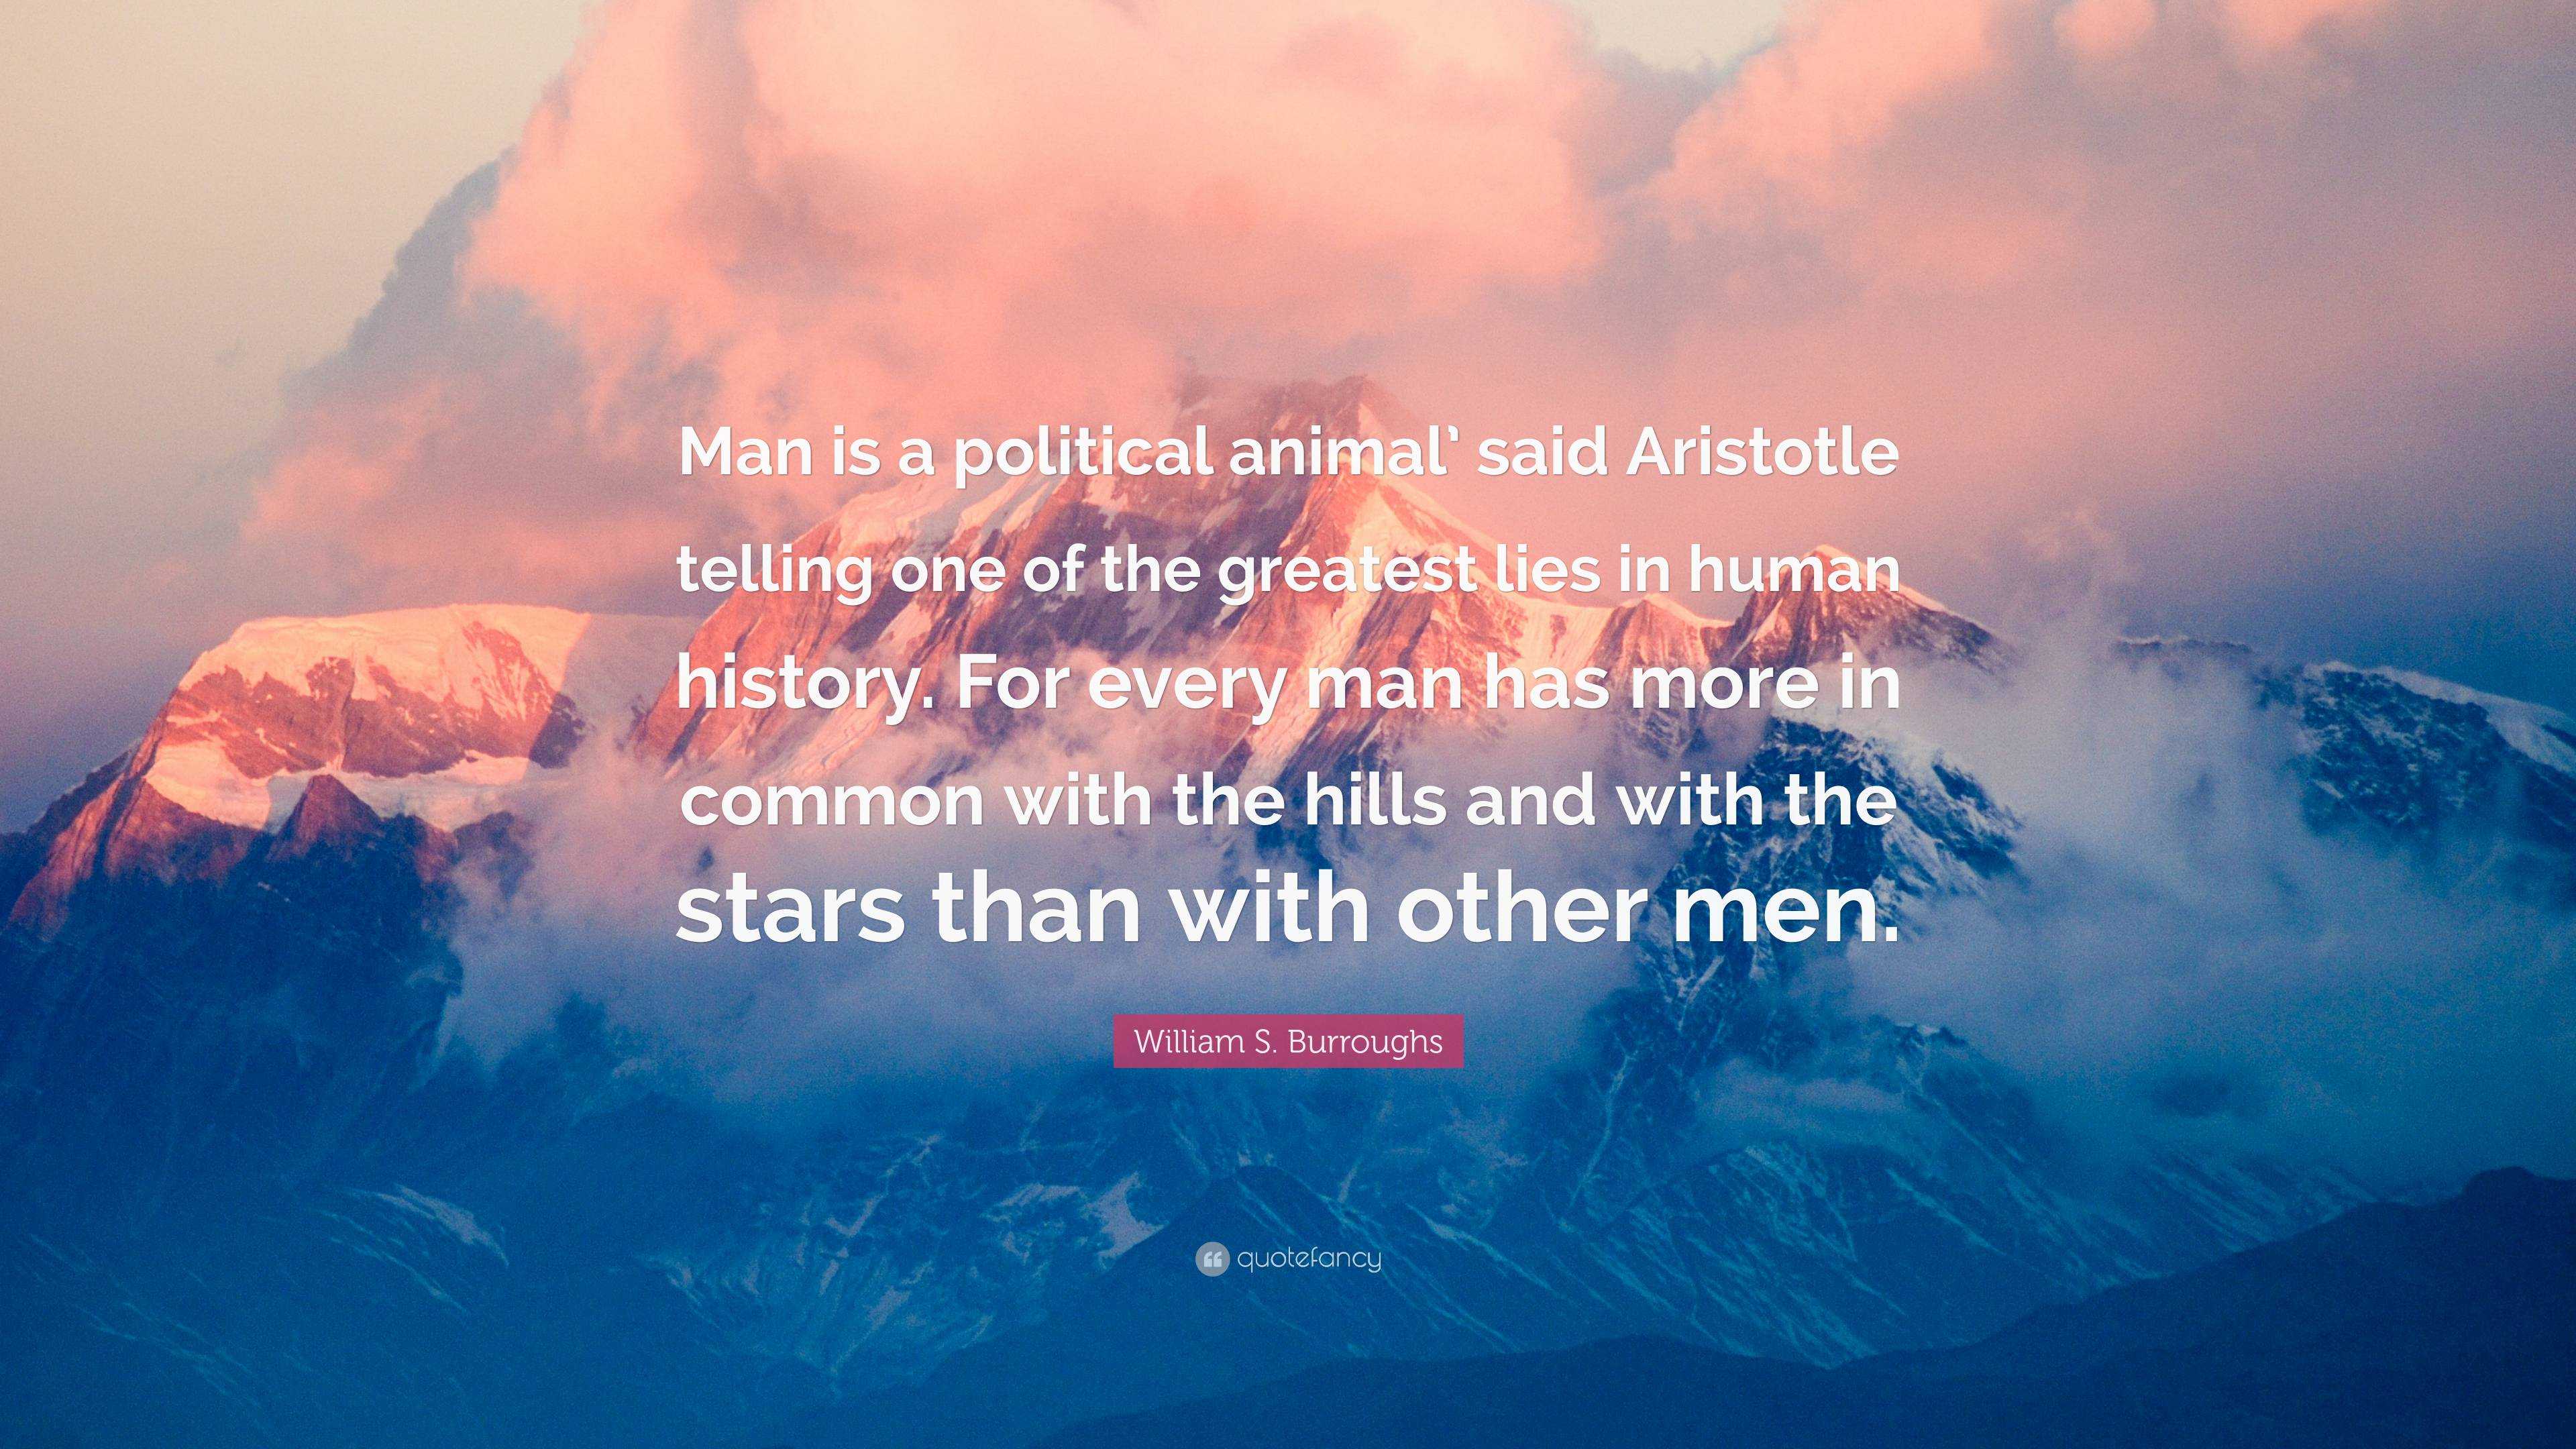 William S. Burroughs Quote: “Man is a political animal' said Aristotle  telling one of the greatest lies in human history. For every man has more  in c...”